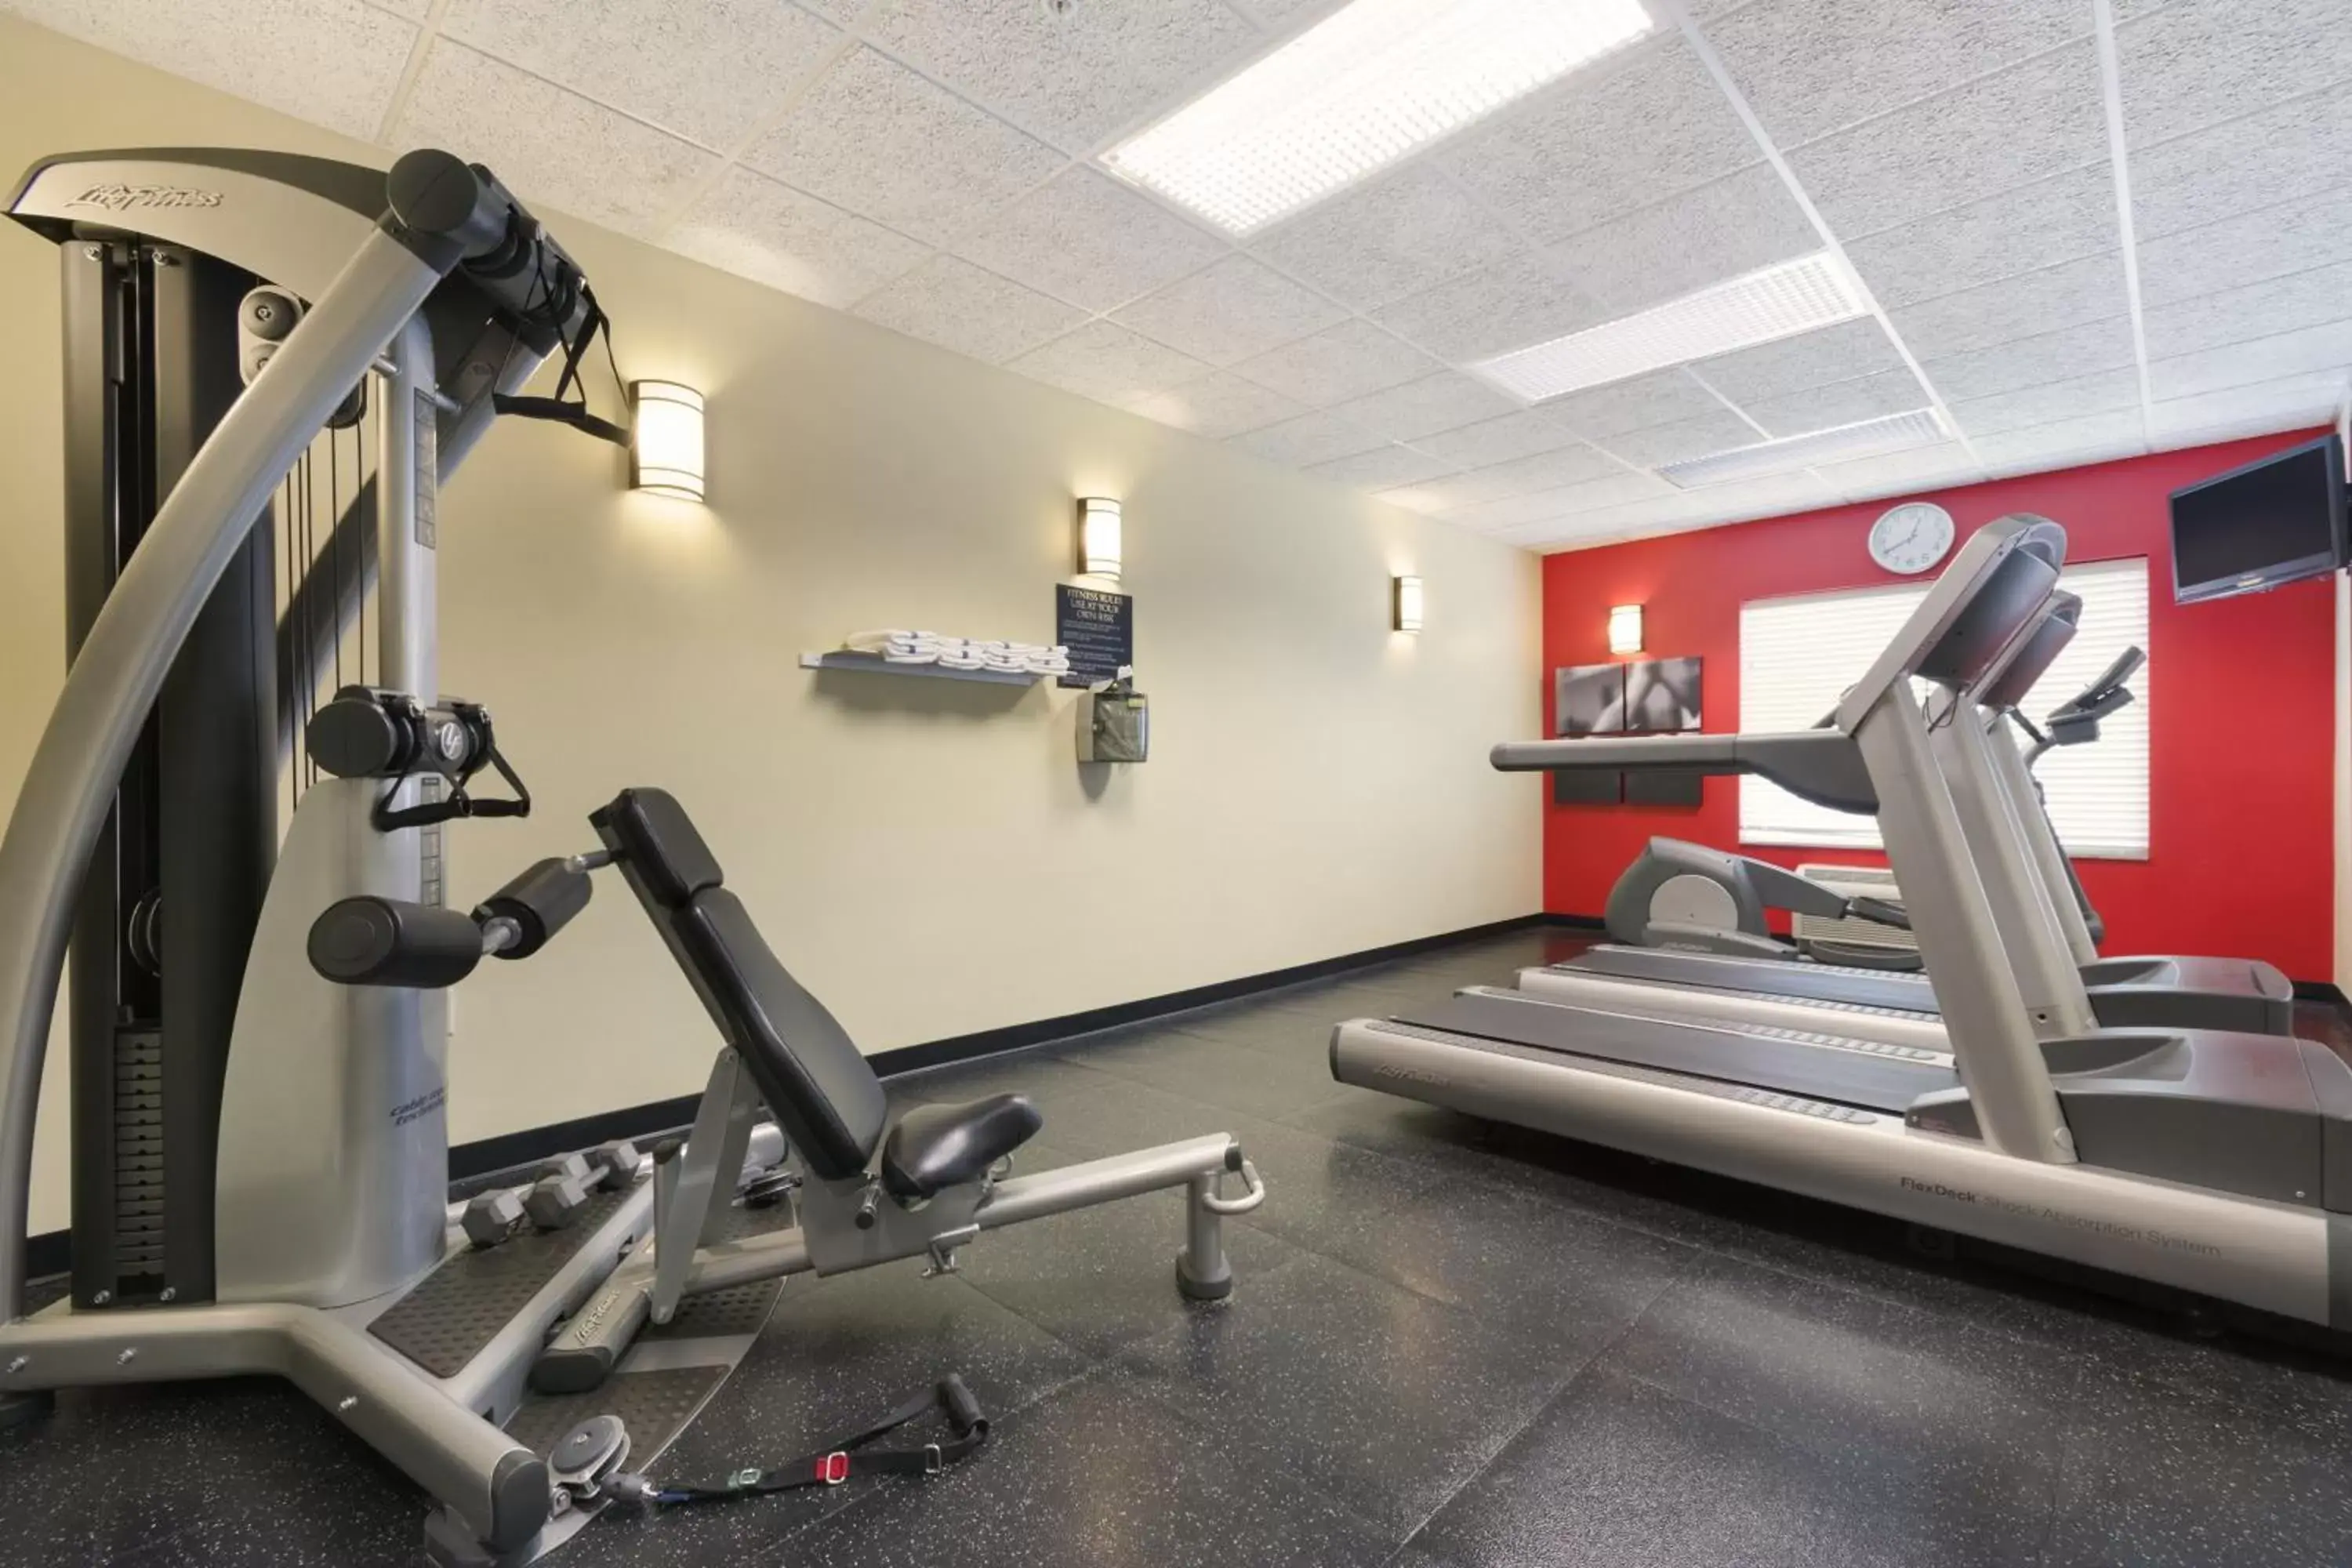 Fitness centre/facilities, Fitness Center/Facilities in Country Inn & Suites by Radisson, Covington, LA